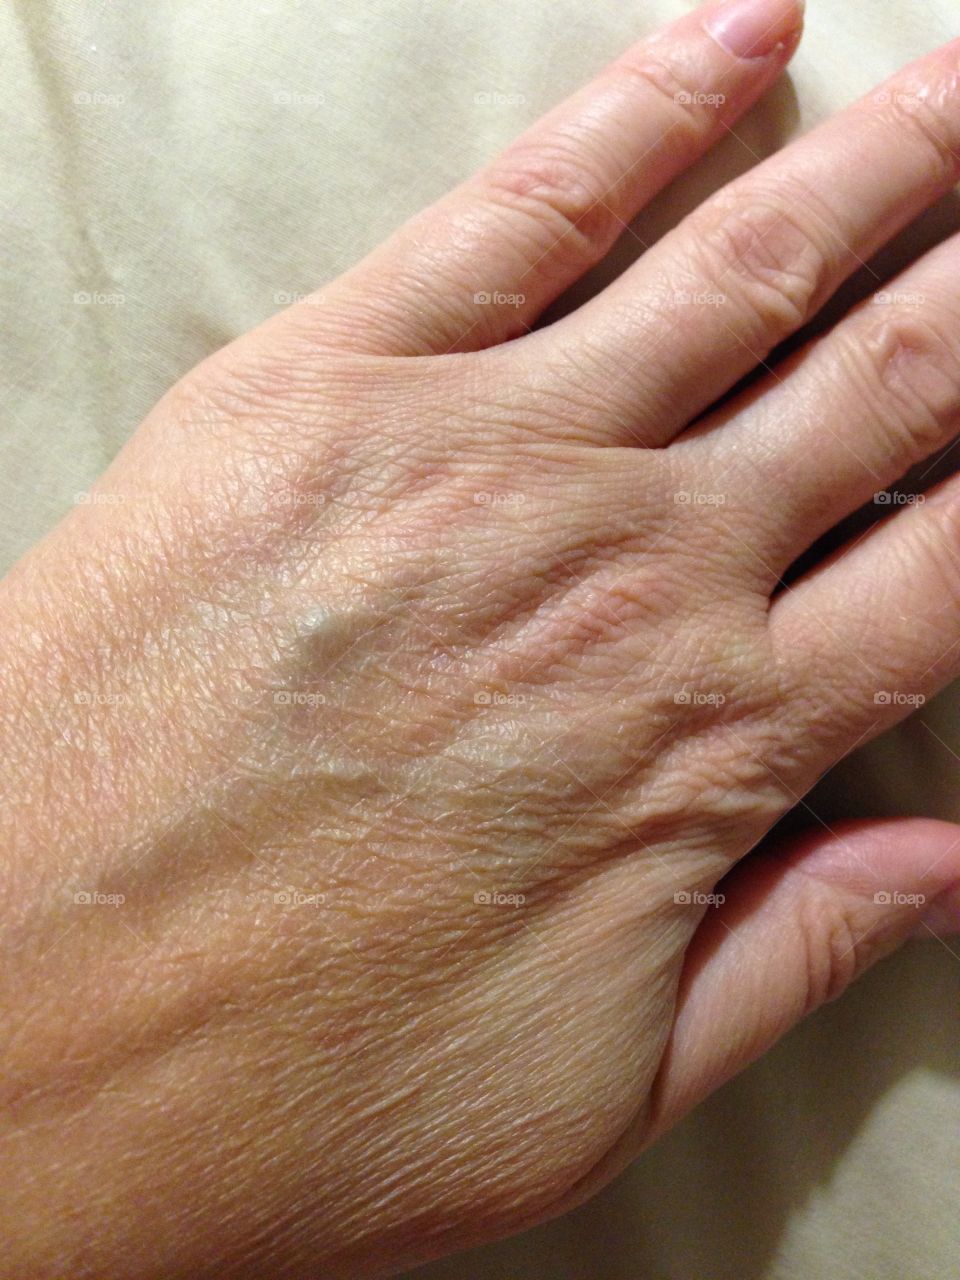 This is the left hand of a 44 year old Caucasian female.